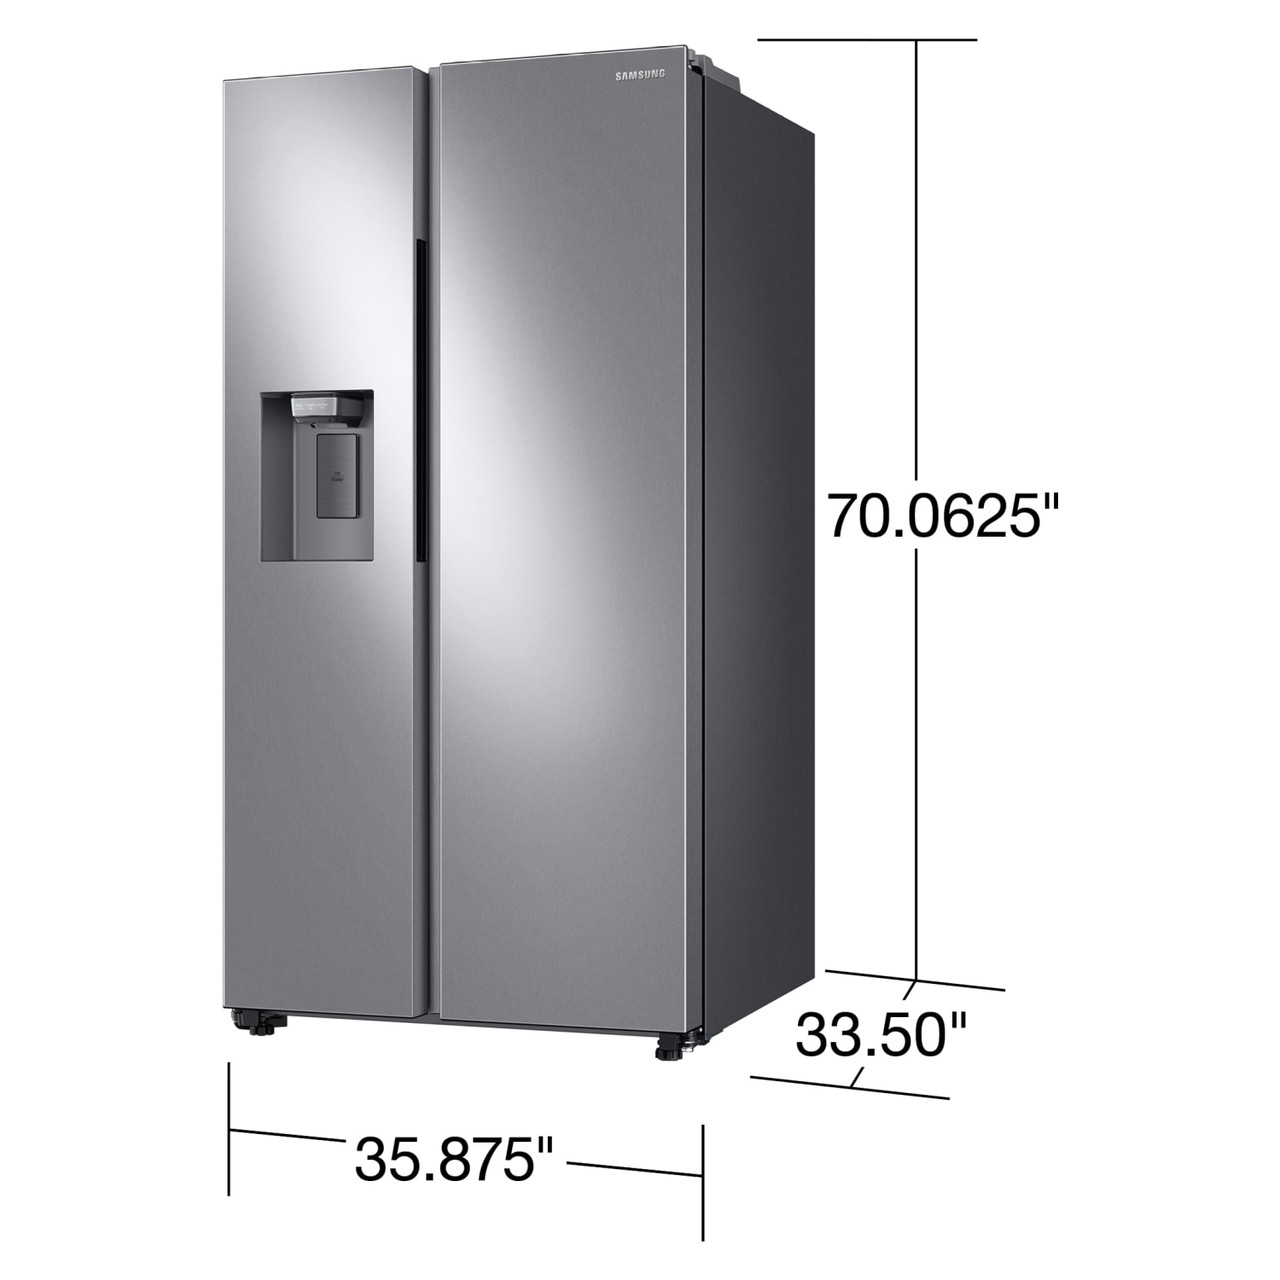 Samsung 27.4 cu. ft. Large Capacity Side-By-Side Refrigerator - RS27T5200SR